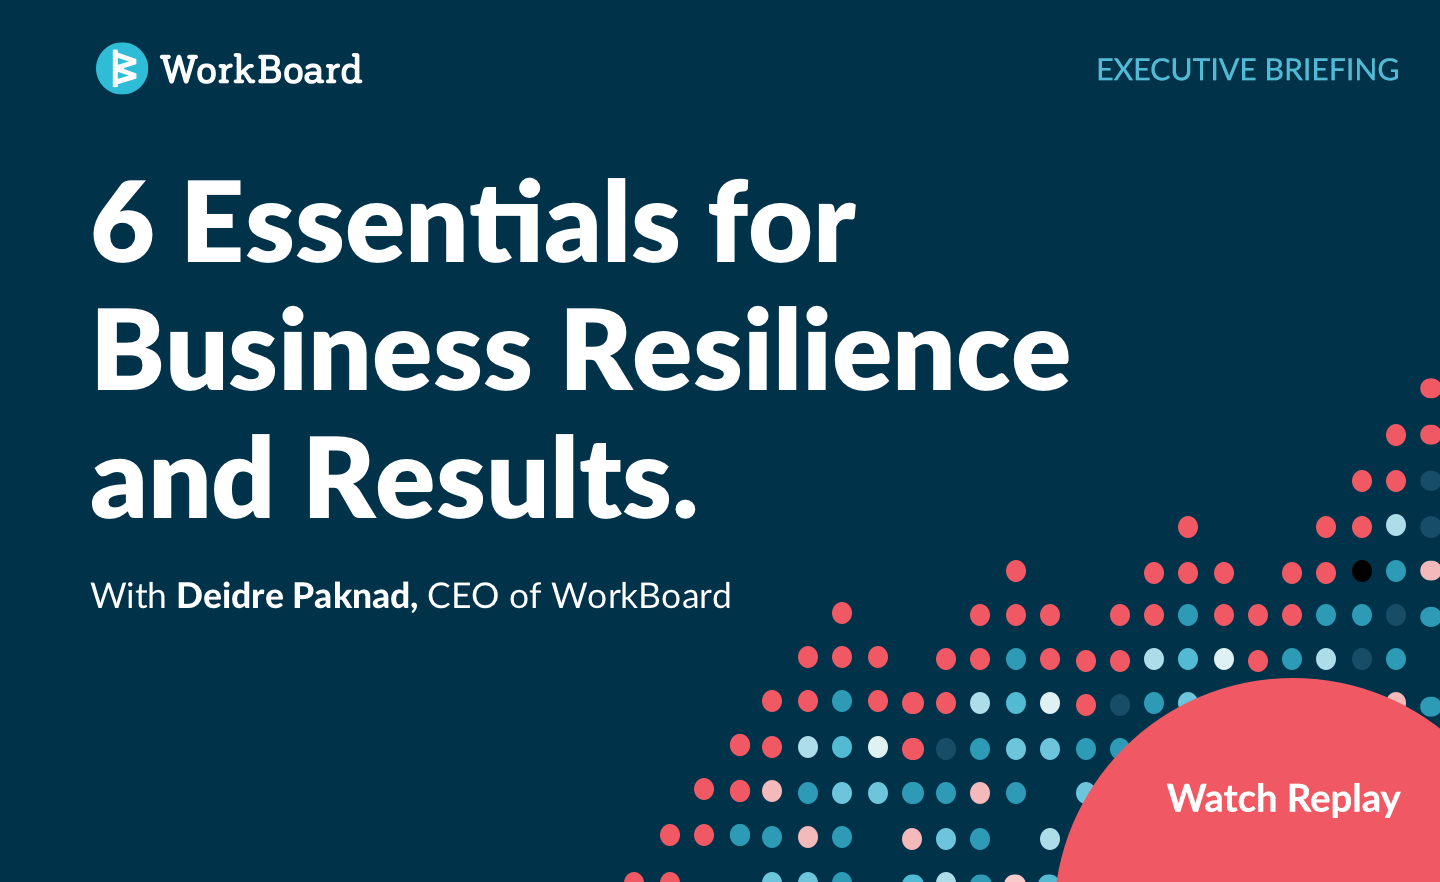 6 Essentials for Business Resilience and Results.